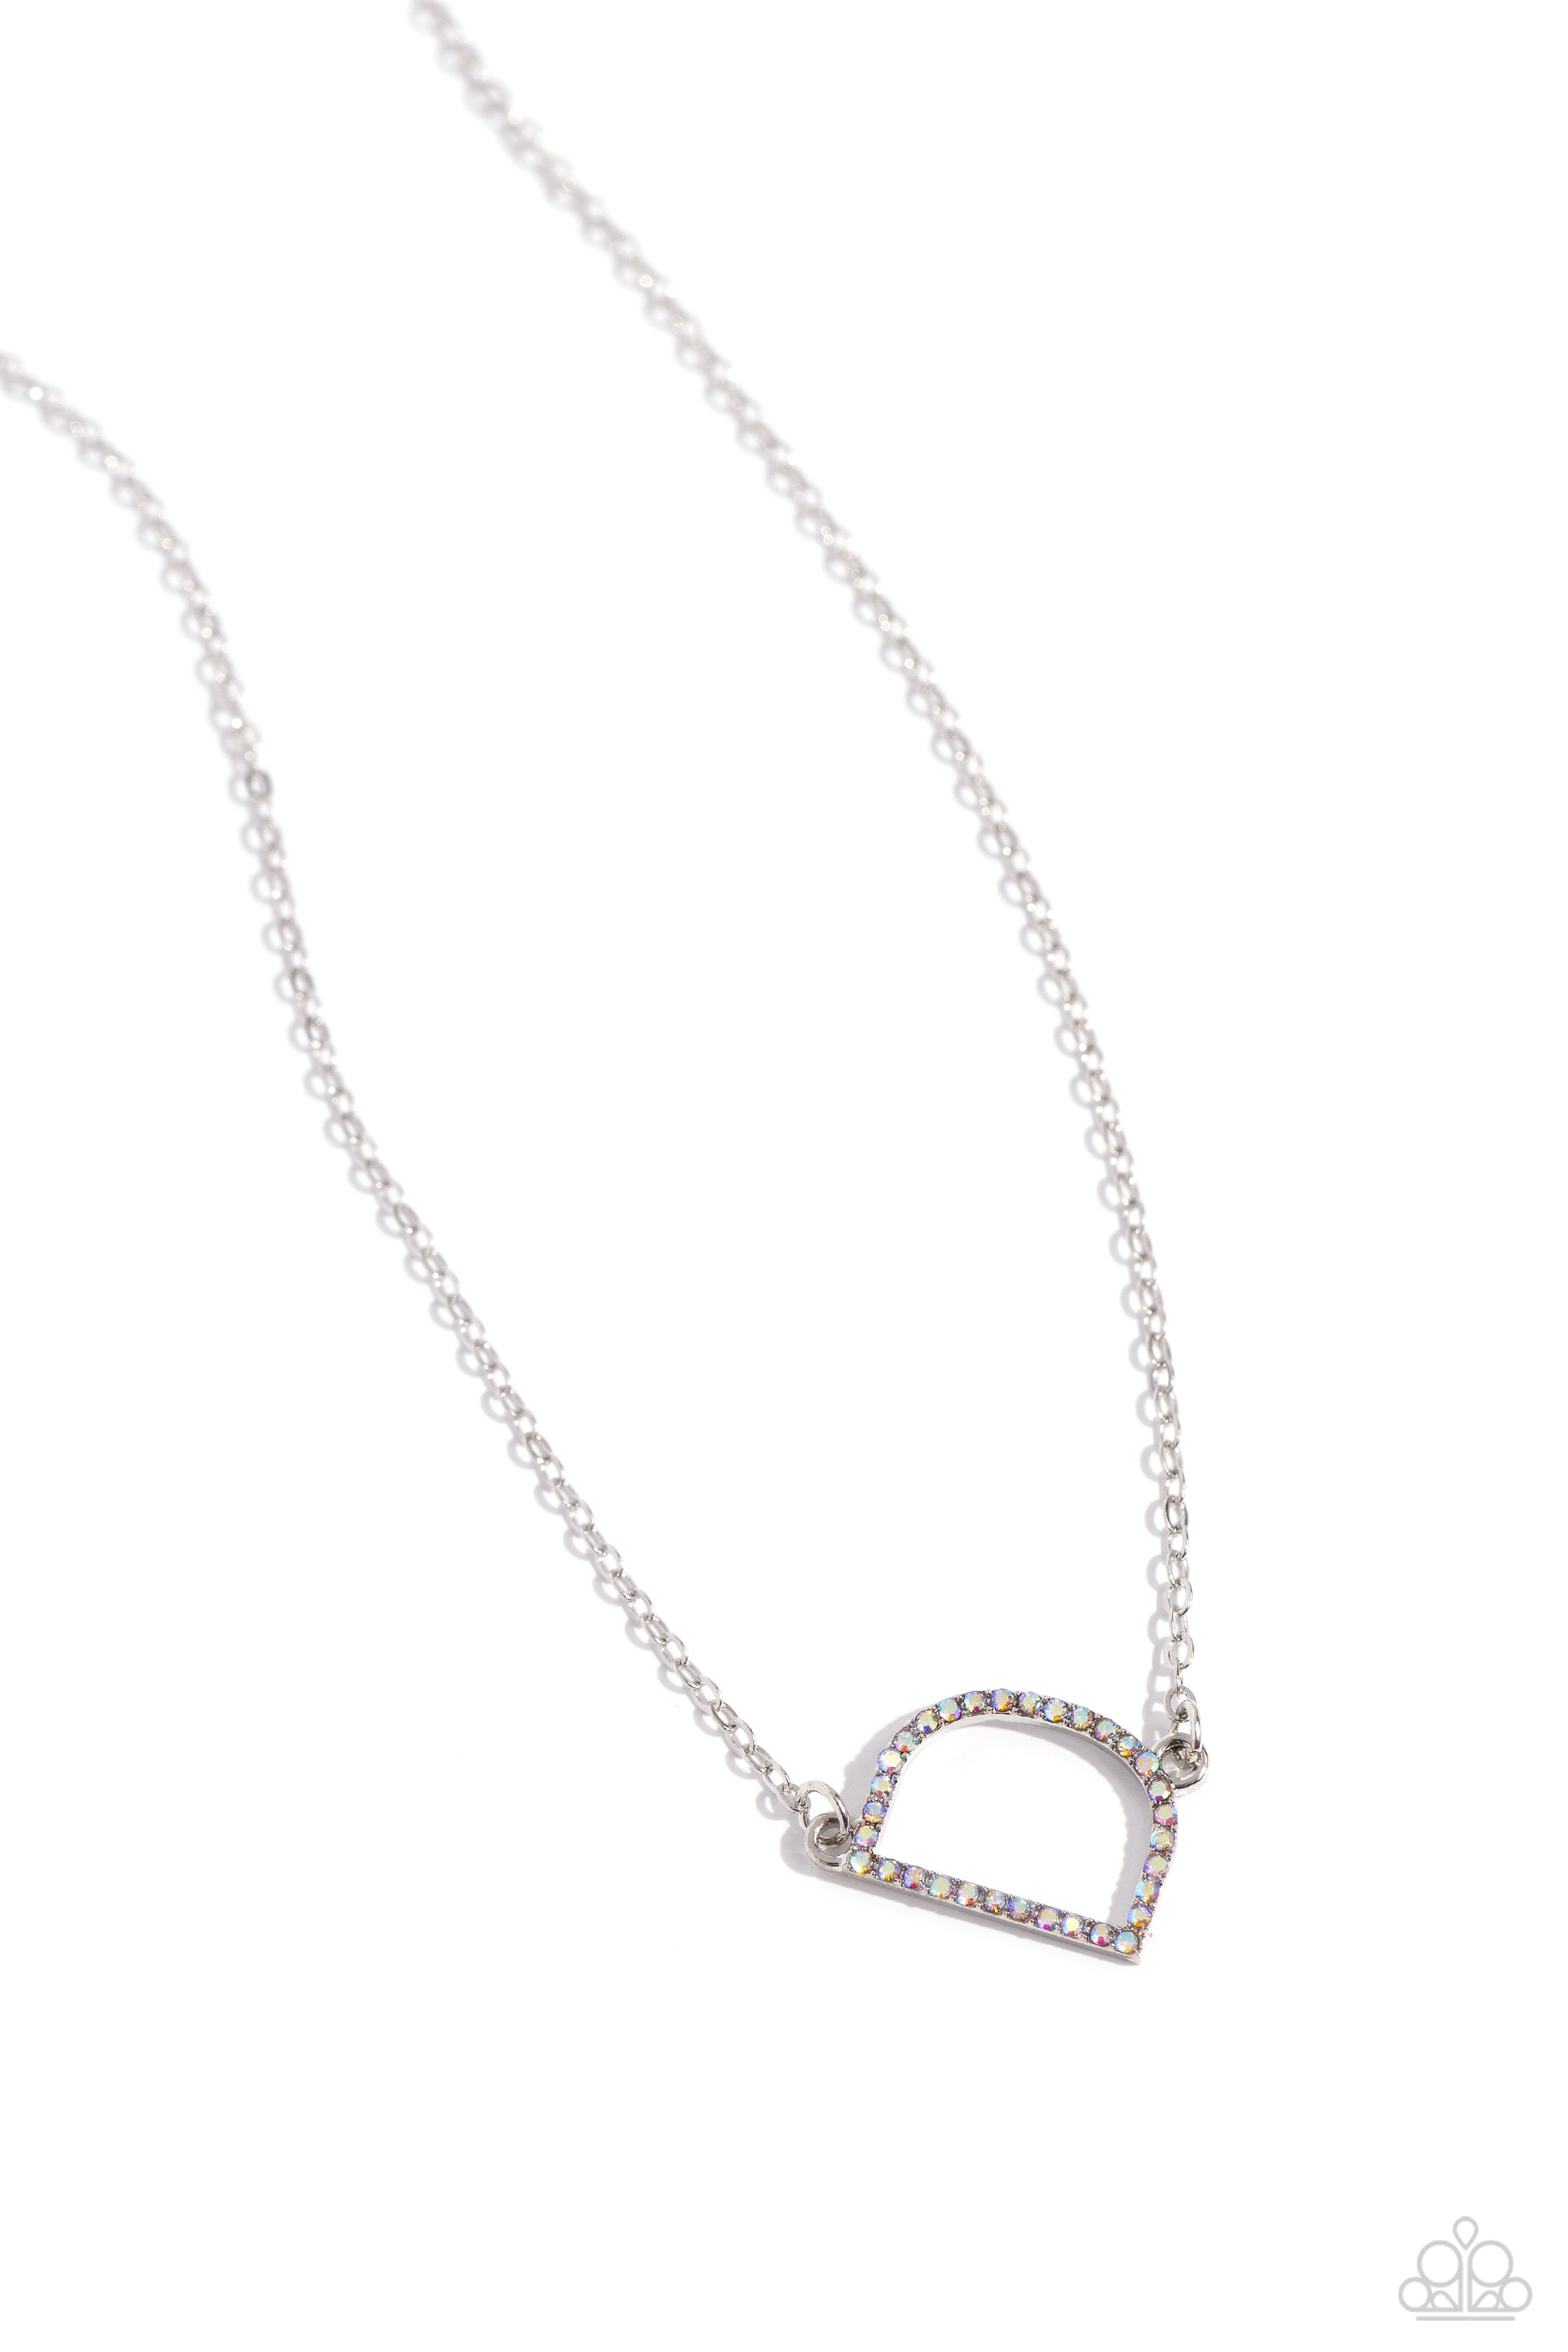 INITIALLY Yours Multi "D" Necklace - Paparazzi Accessories  Embossed with dainty iridescent rhinestones, a silver letter "D" hovers below the collar from a dainty silver chain, for a sentimentally simple design. Features an adjustable clasp closure. Due to its prismatic palette, color may vary.  Sold as one individual necklace. Includes one pair of matching earrings.  P2DA-MTXX-127XX